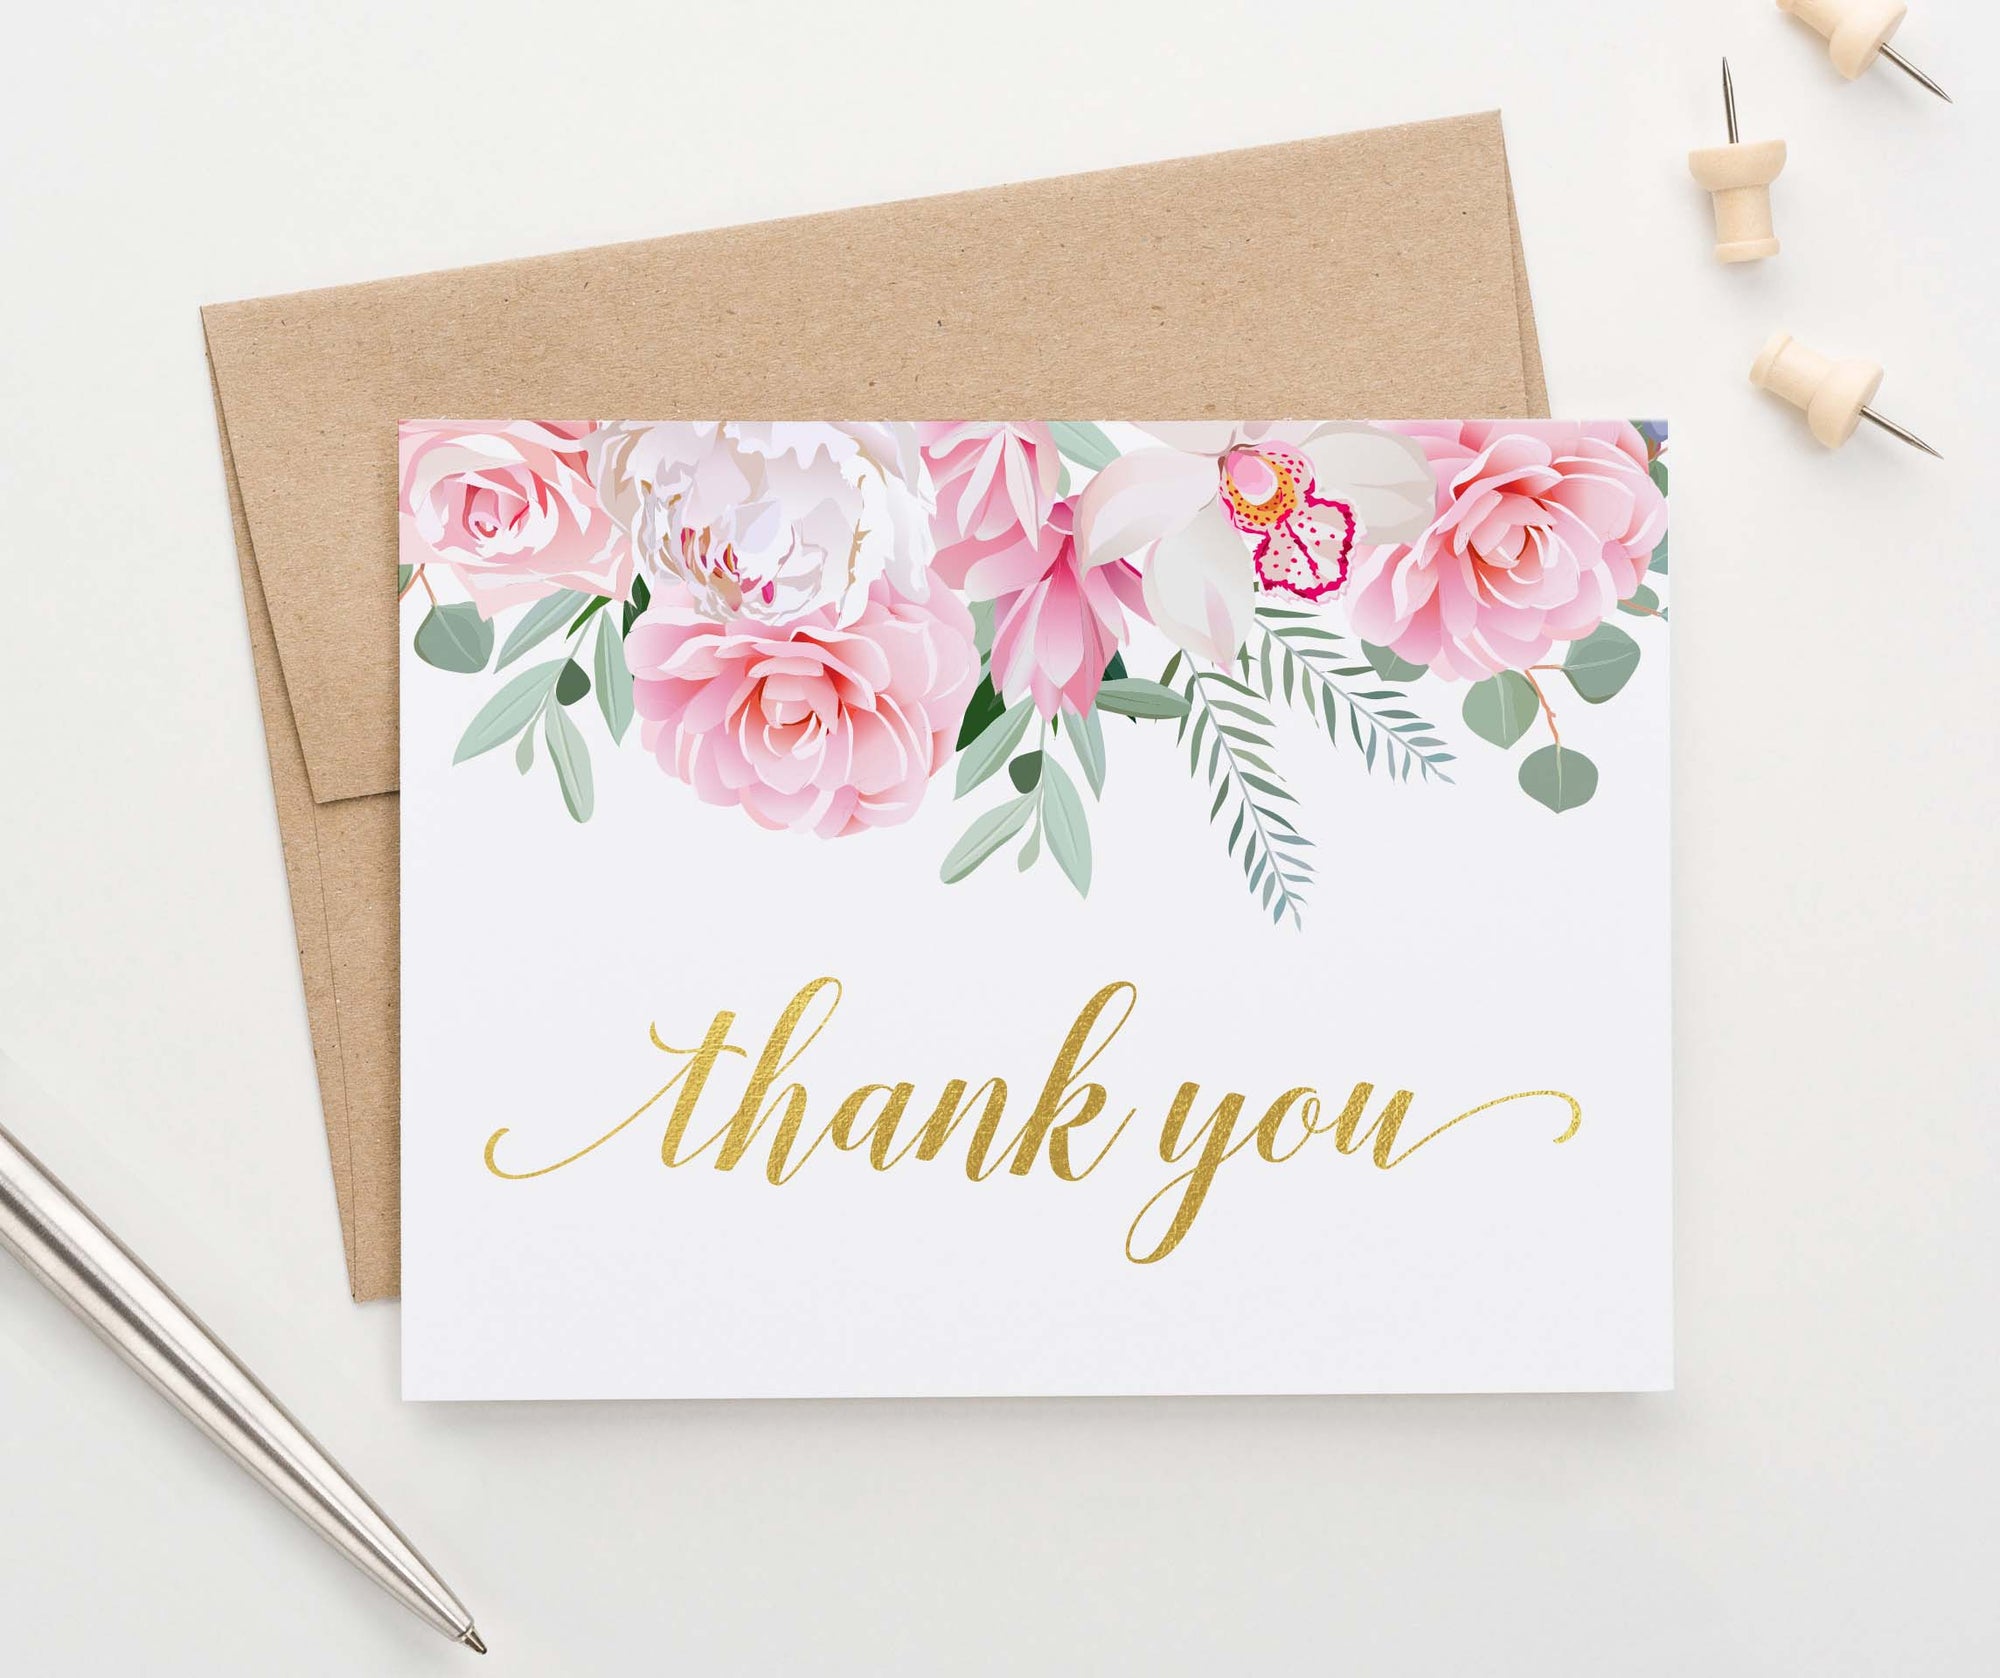 Personalized Thank You Funeral Cards with White Florals - Modern Pink Paper